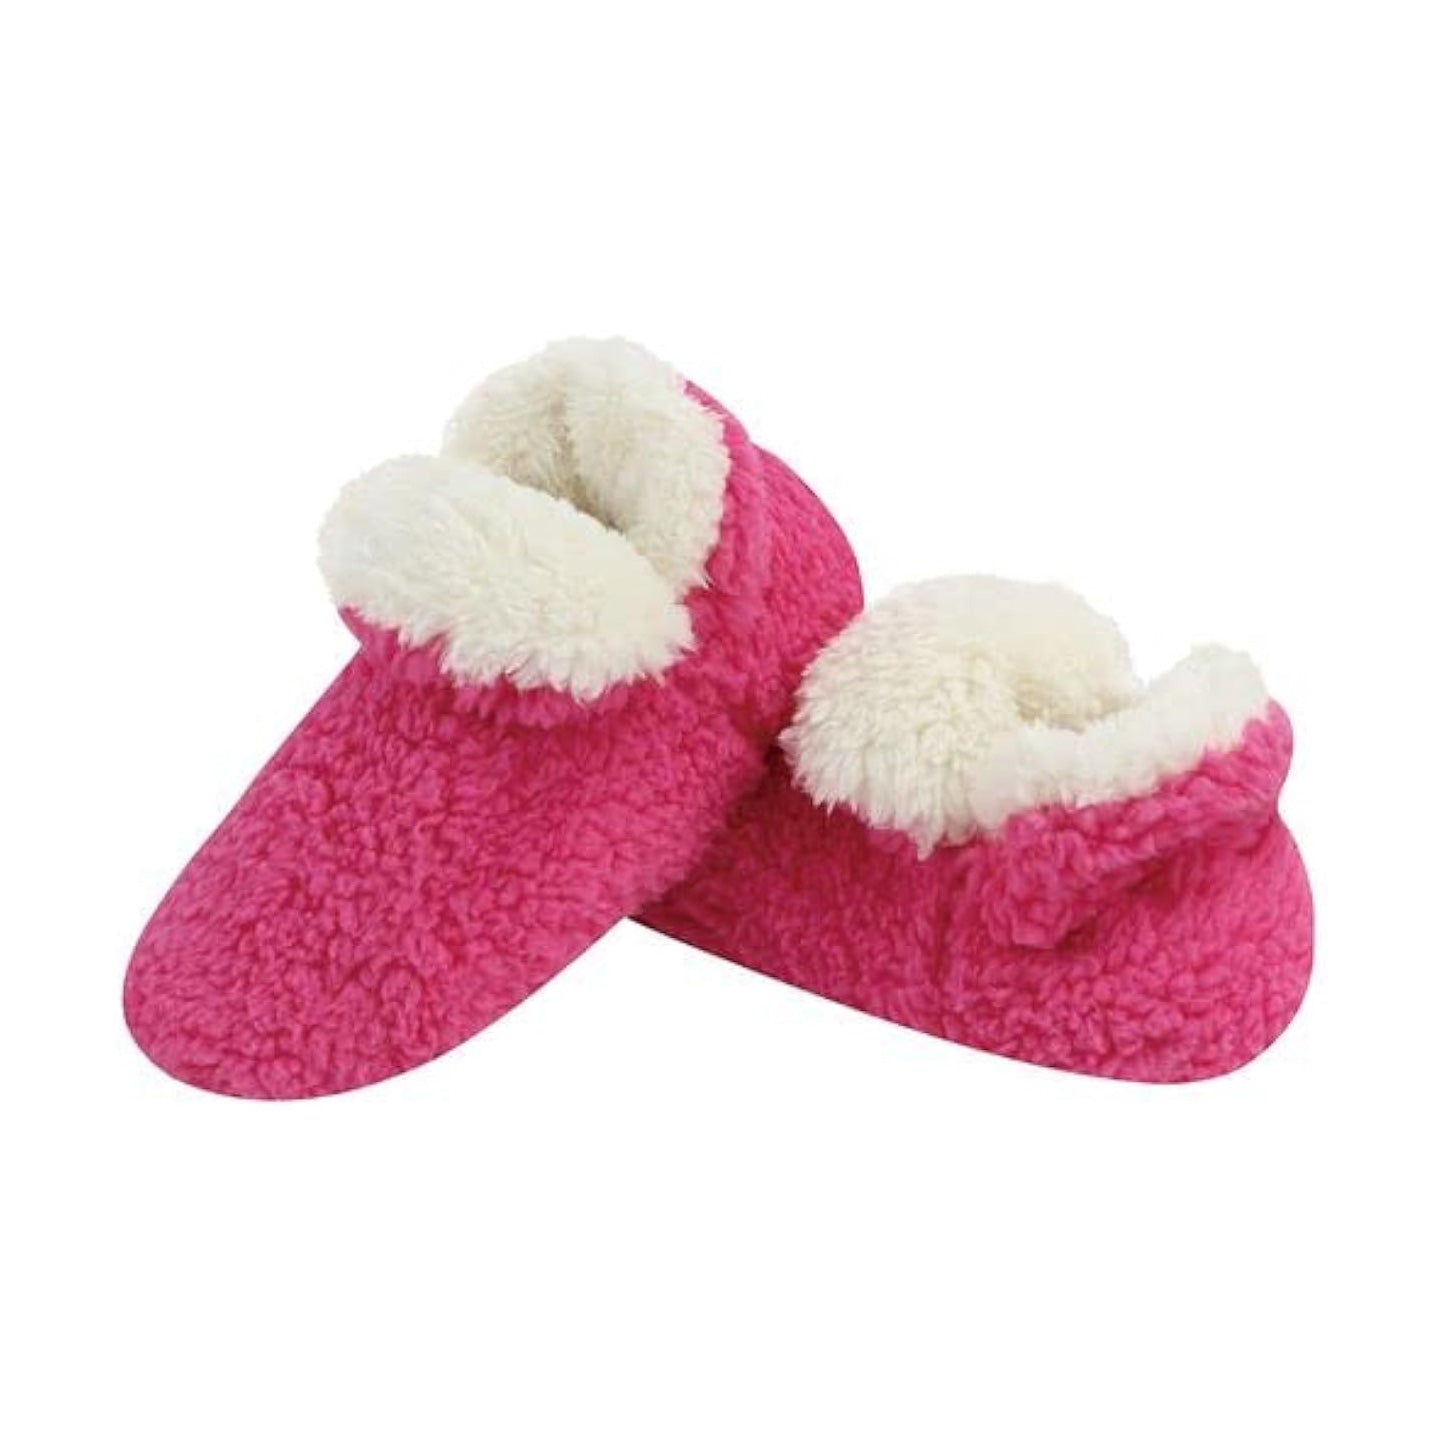 Jack and Jill Bootie Slippers